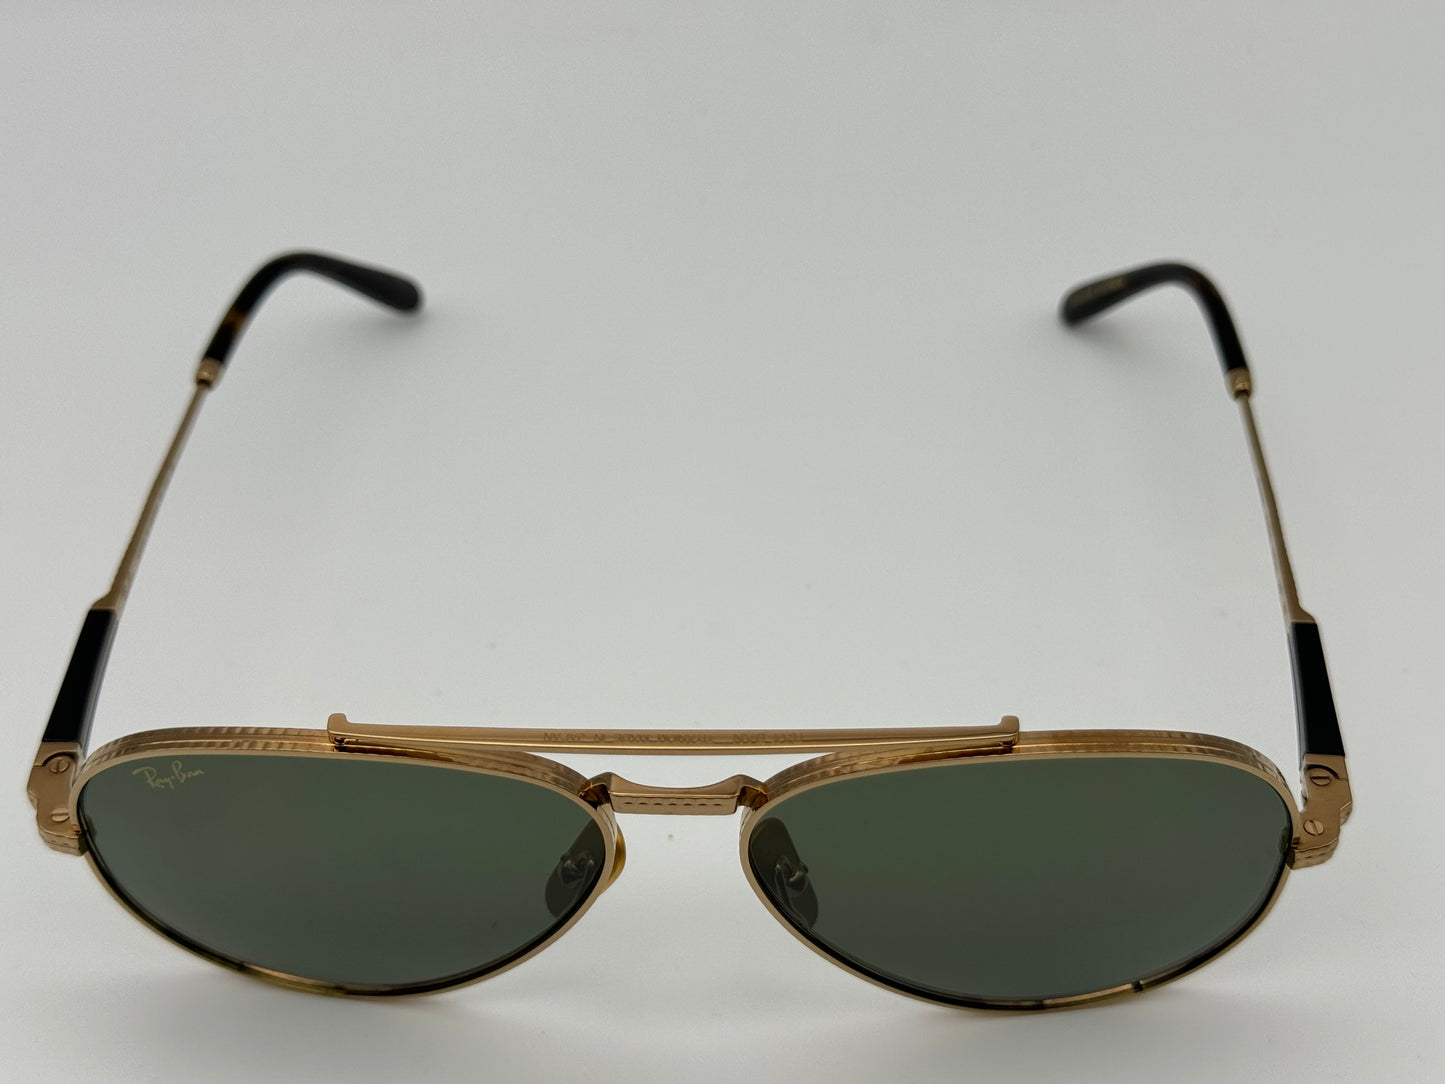 Ray Ban AVIATOR II 58mm TITANIUM RB 8225 Gold / Green 313852 Made in Japan Missing Box